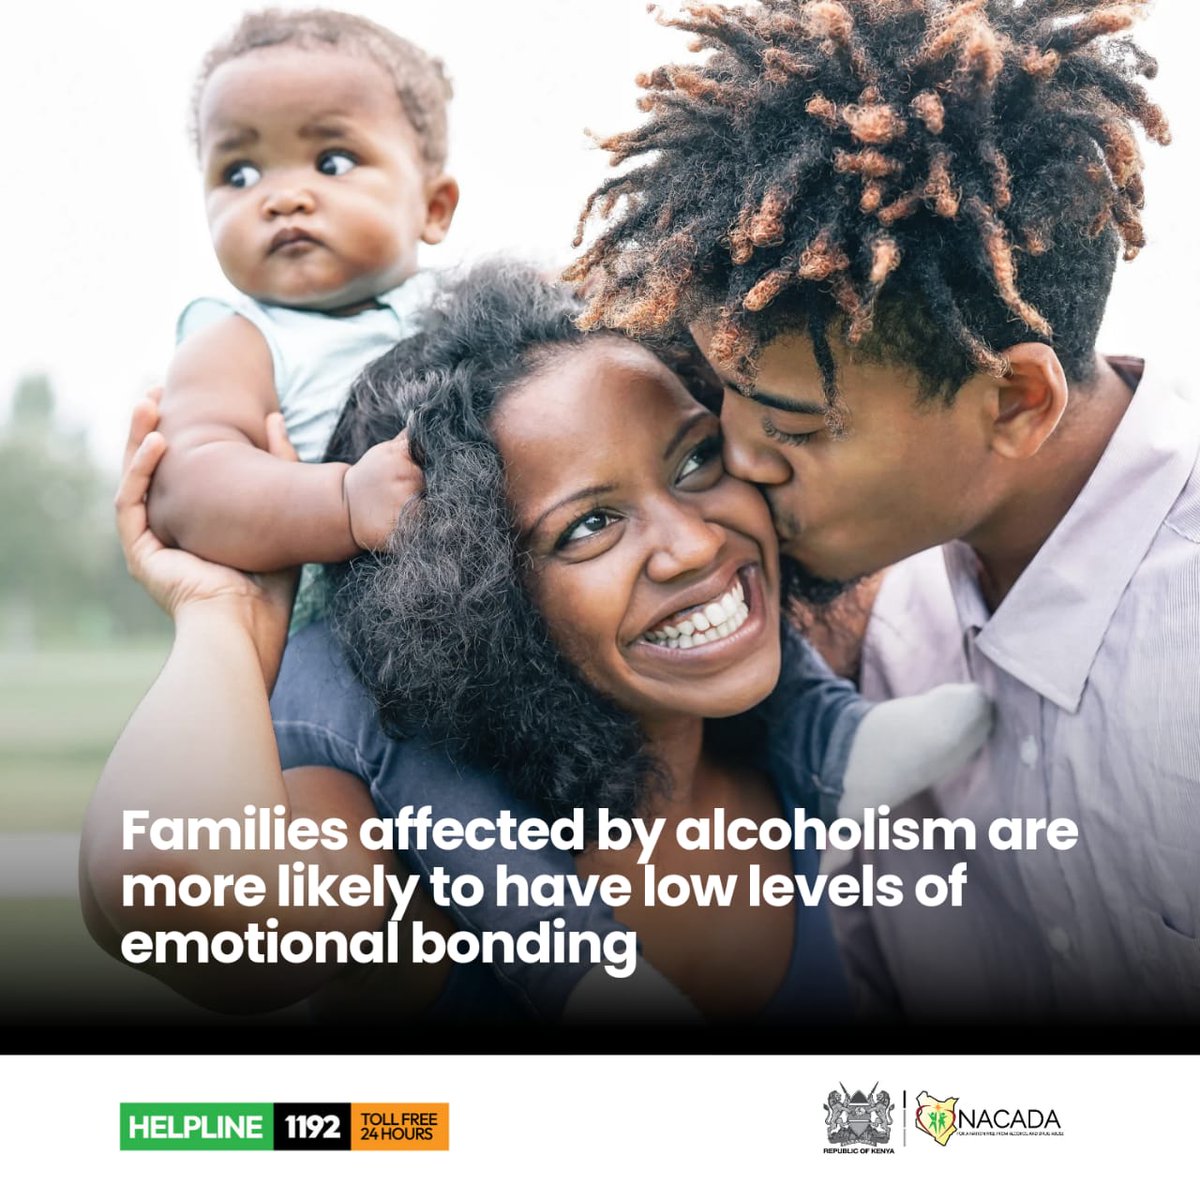 Alcohol abuse has the potential to destroy families. Research shows that families affected by alcoholism are more likely to have low levels of emotional bonding, expressiveness and independence #Avoidalcohol #safecommunities @mwangi_simons @TwalaJudy @omerikwa @Mairori4…